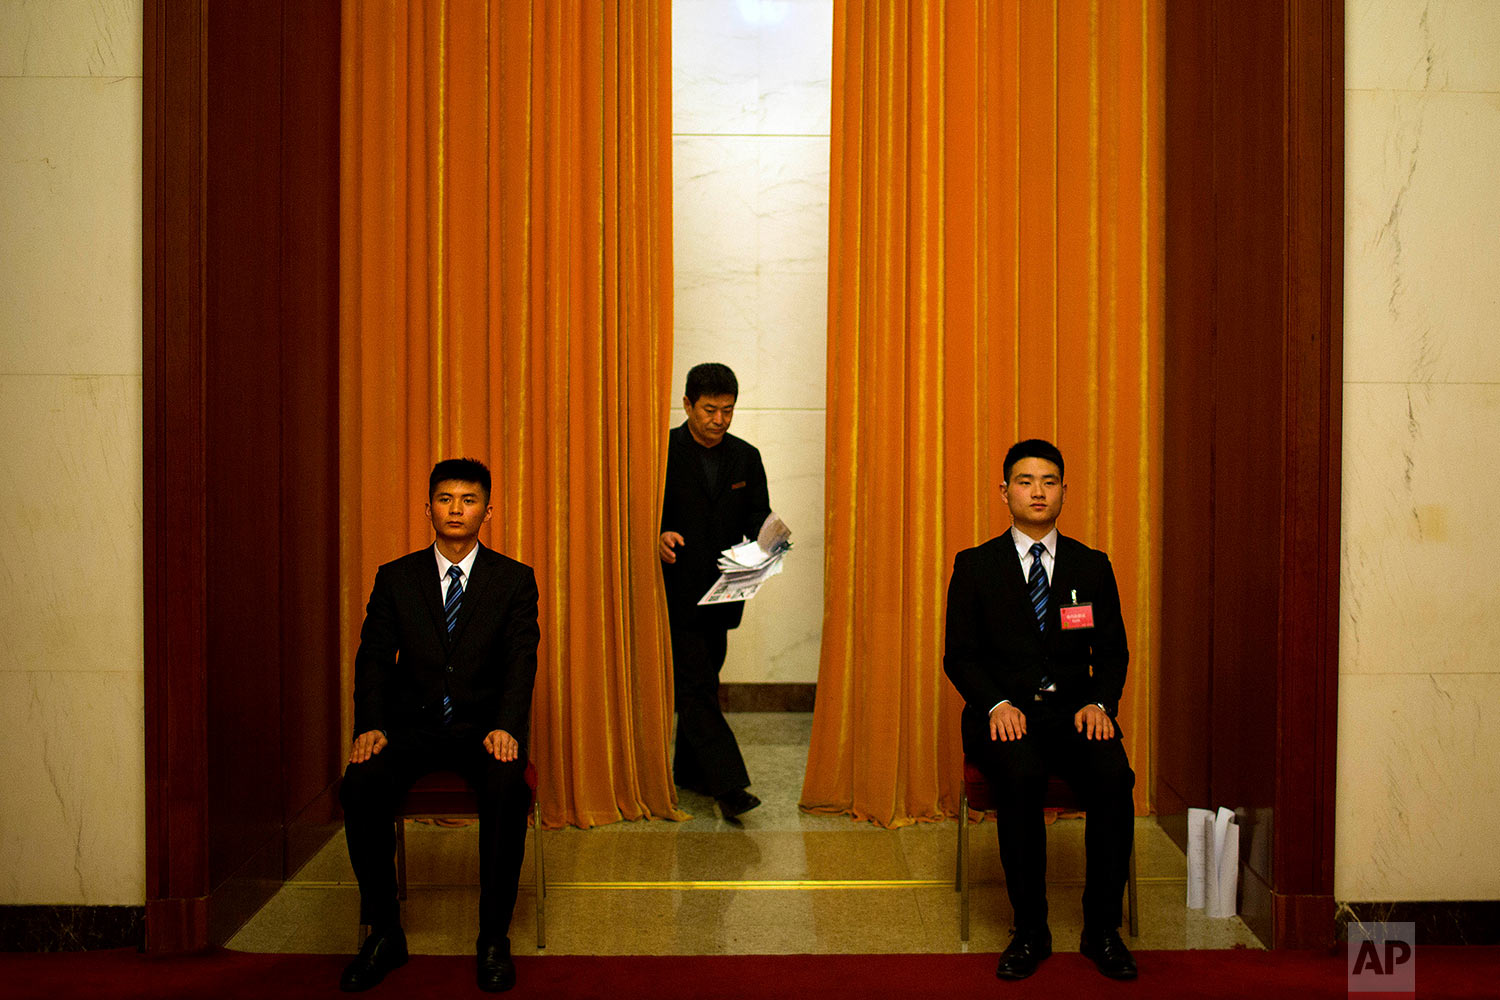  In this Tuesday, March 6, 2018 photo, an official walks out from behind a curtained-off area at the Great Hall of the People in Beijing. (AP Photo/Mark Schiefelbein) 